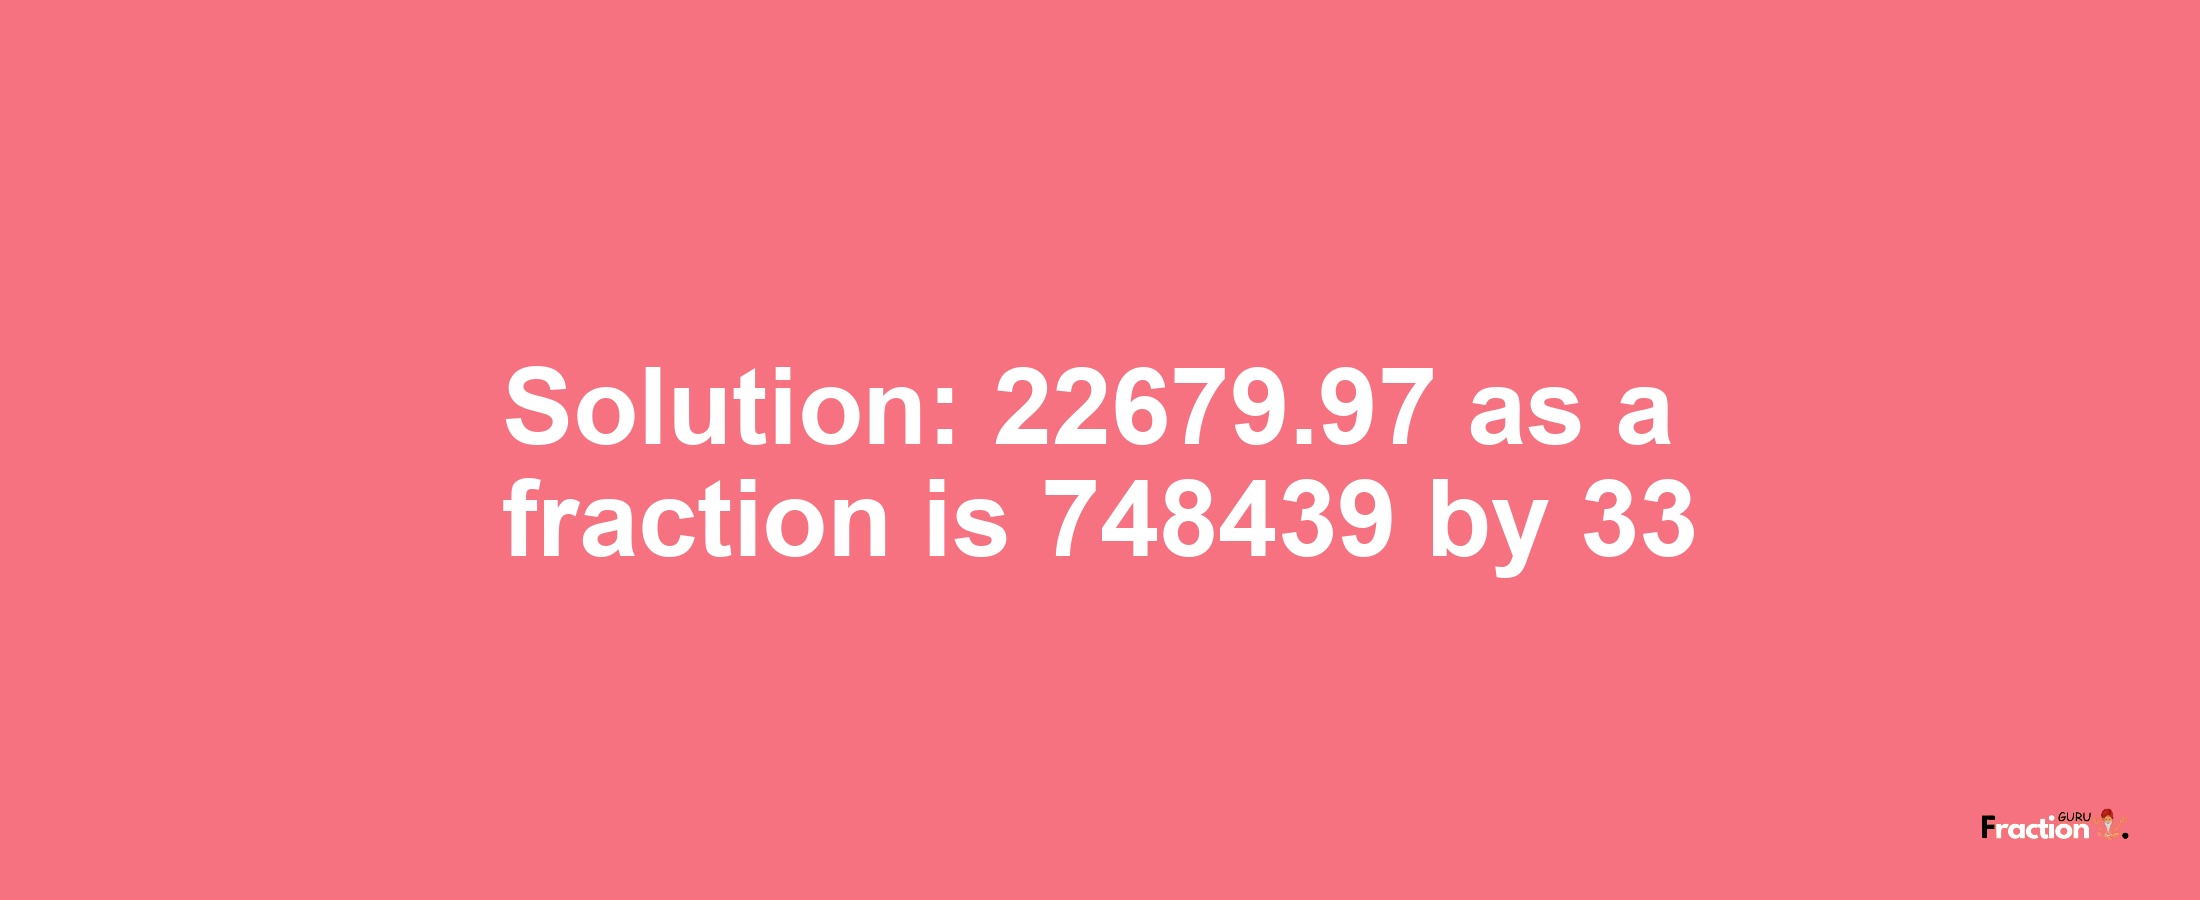 Solution:22679.97 as a fraction is 748439/33